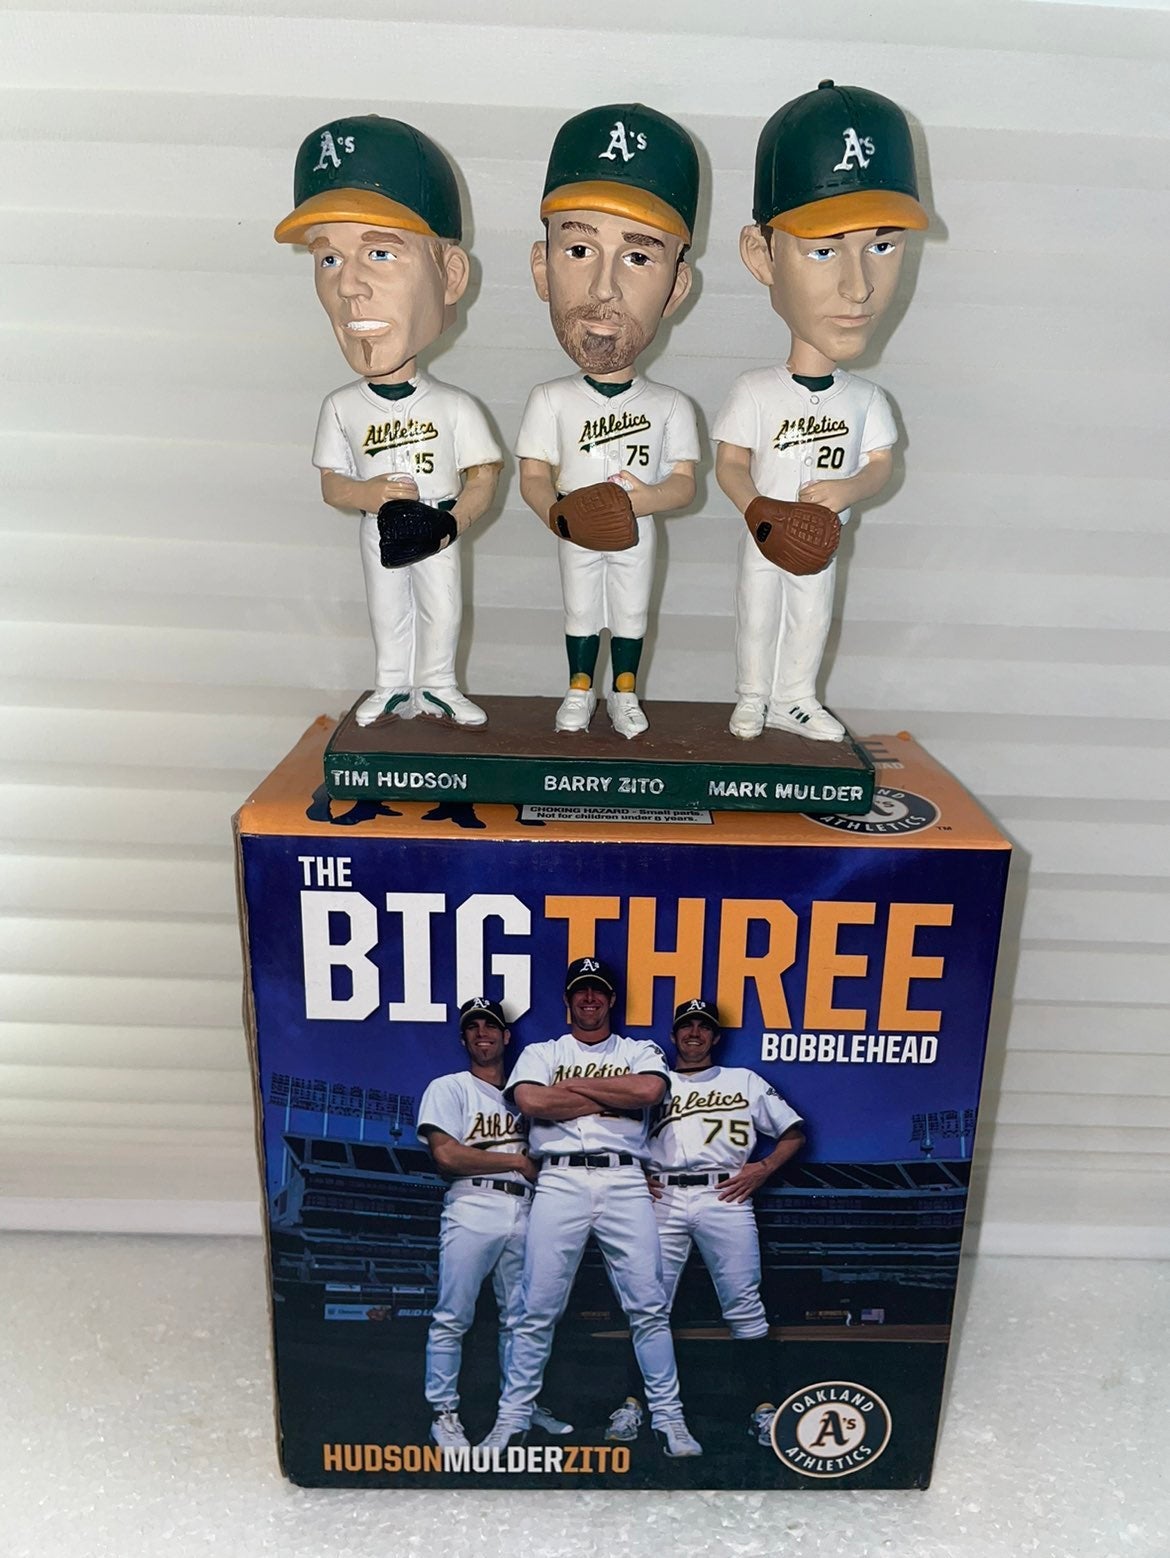 A's Bobbleheads, Oakland Athletics Figurines, A's Figure